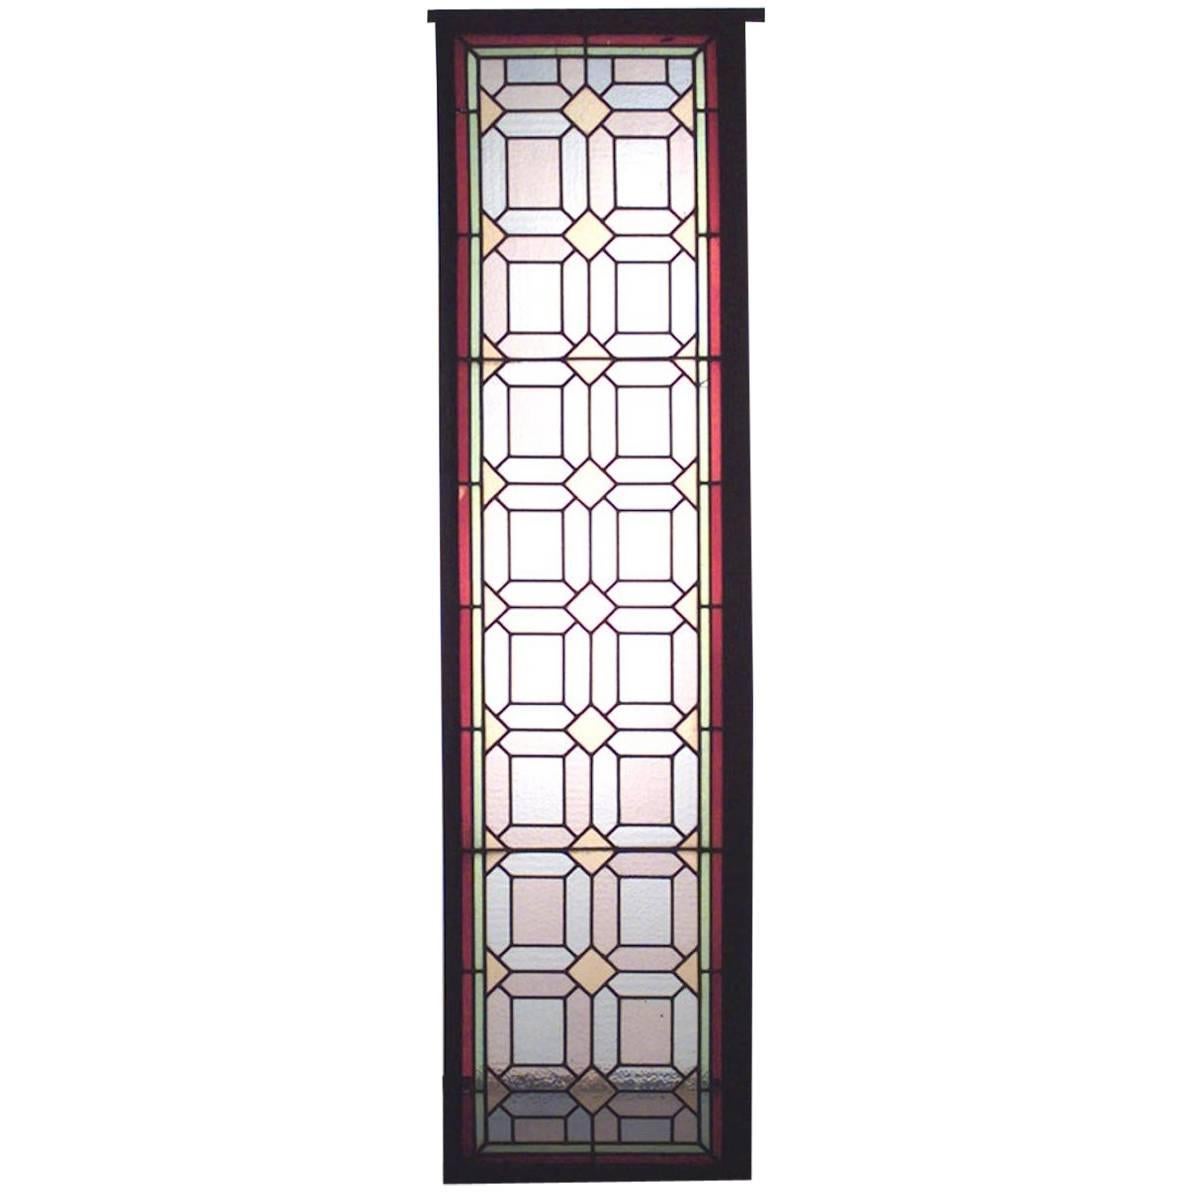 4 American Victorian stained and multicolored leaded glass window panels with 16 square pink & blue panels in wood frame (PRICED EACH)
